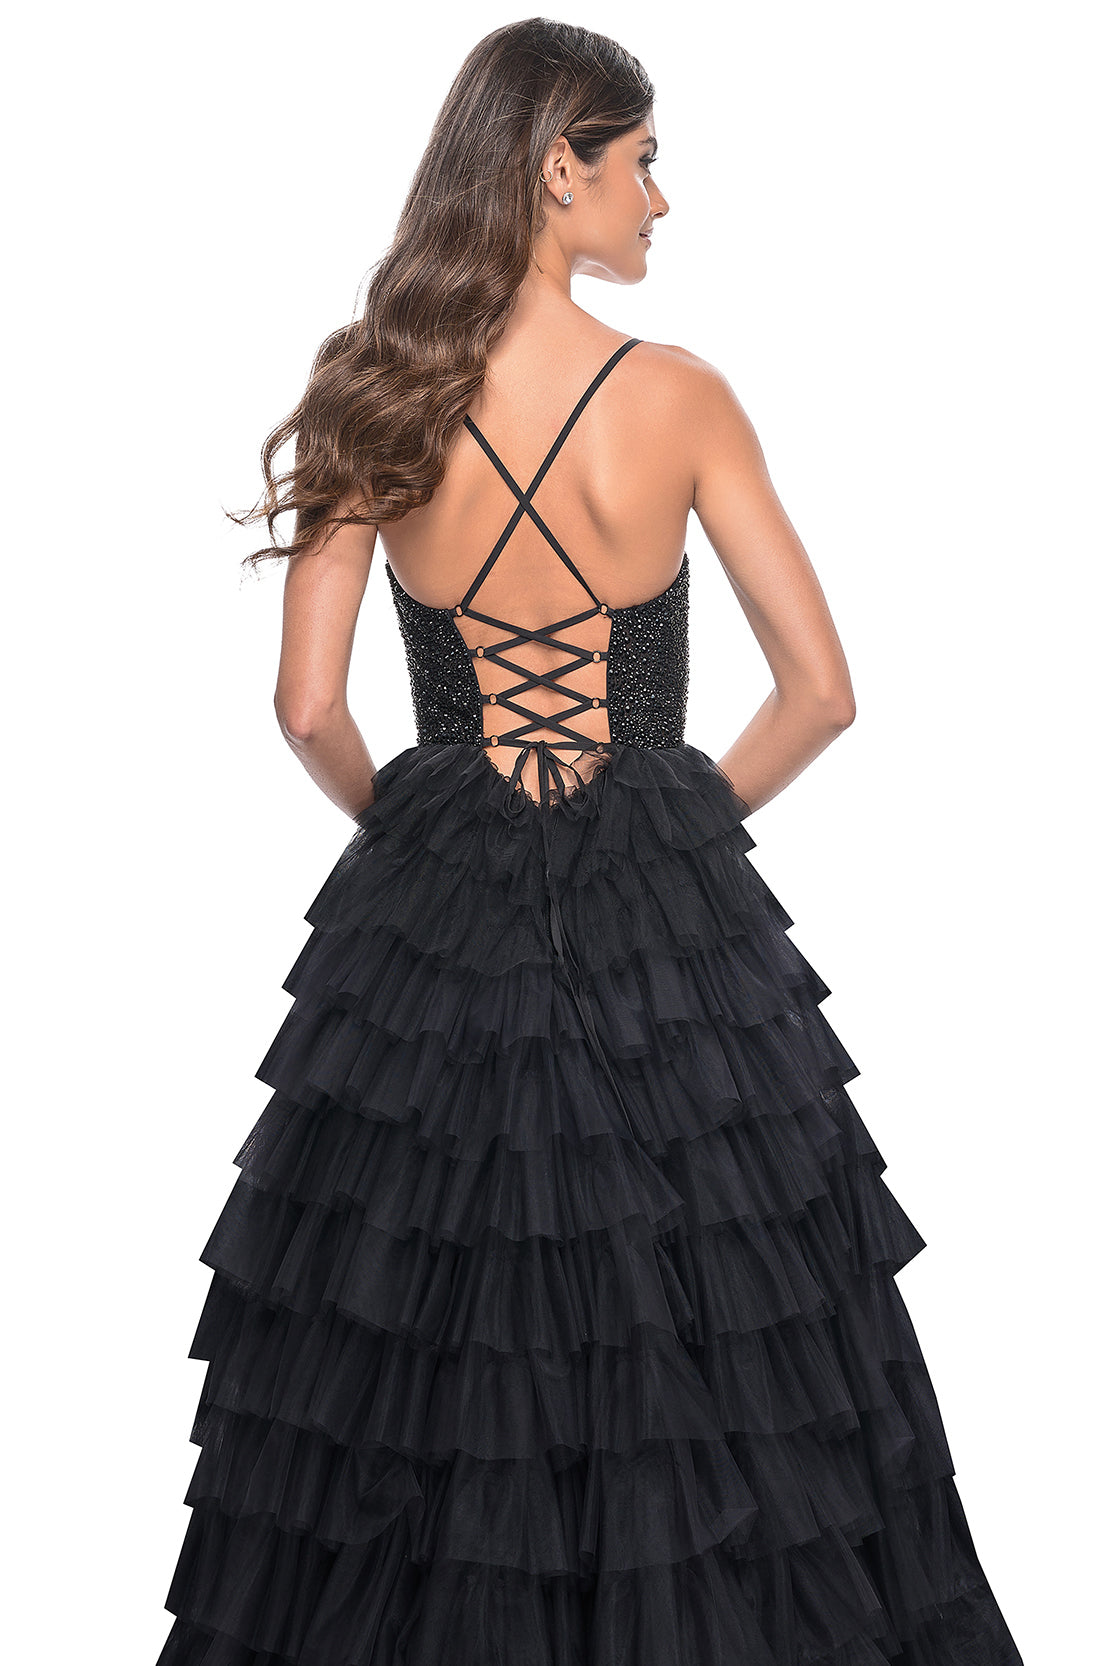 La Femme 32002 Glamorous Rhinestone Embellished Prom Dress - A stunning prom dress featuring a tiered ruffle skirt, fully rhinestone embellished bodice, high slit, and adjustable lace-up back for an elegant and customized look.